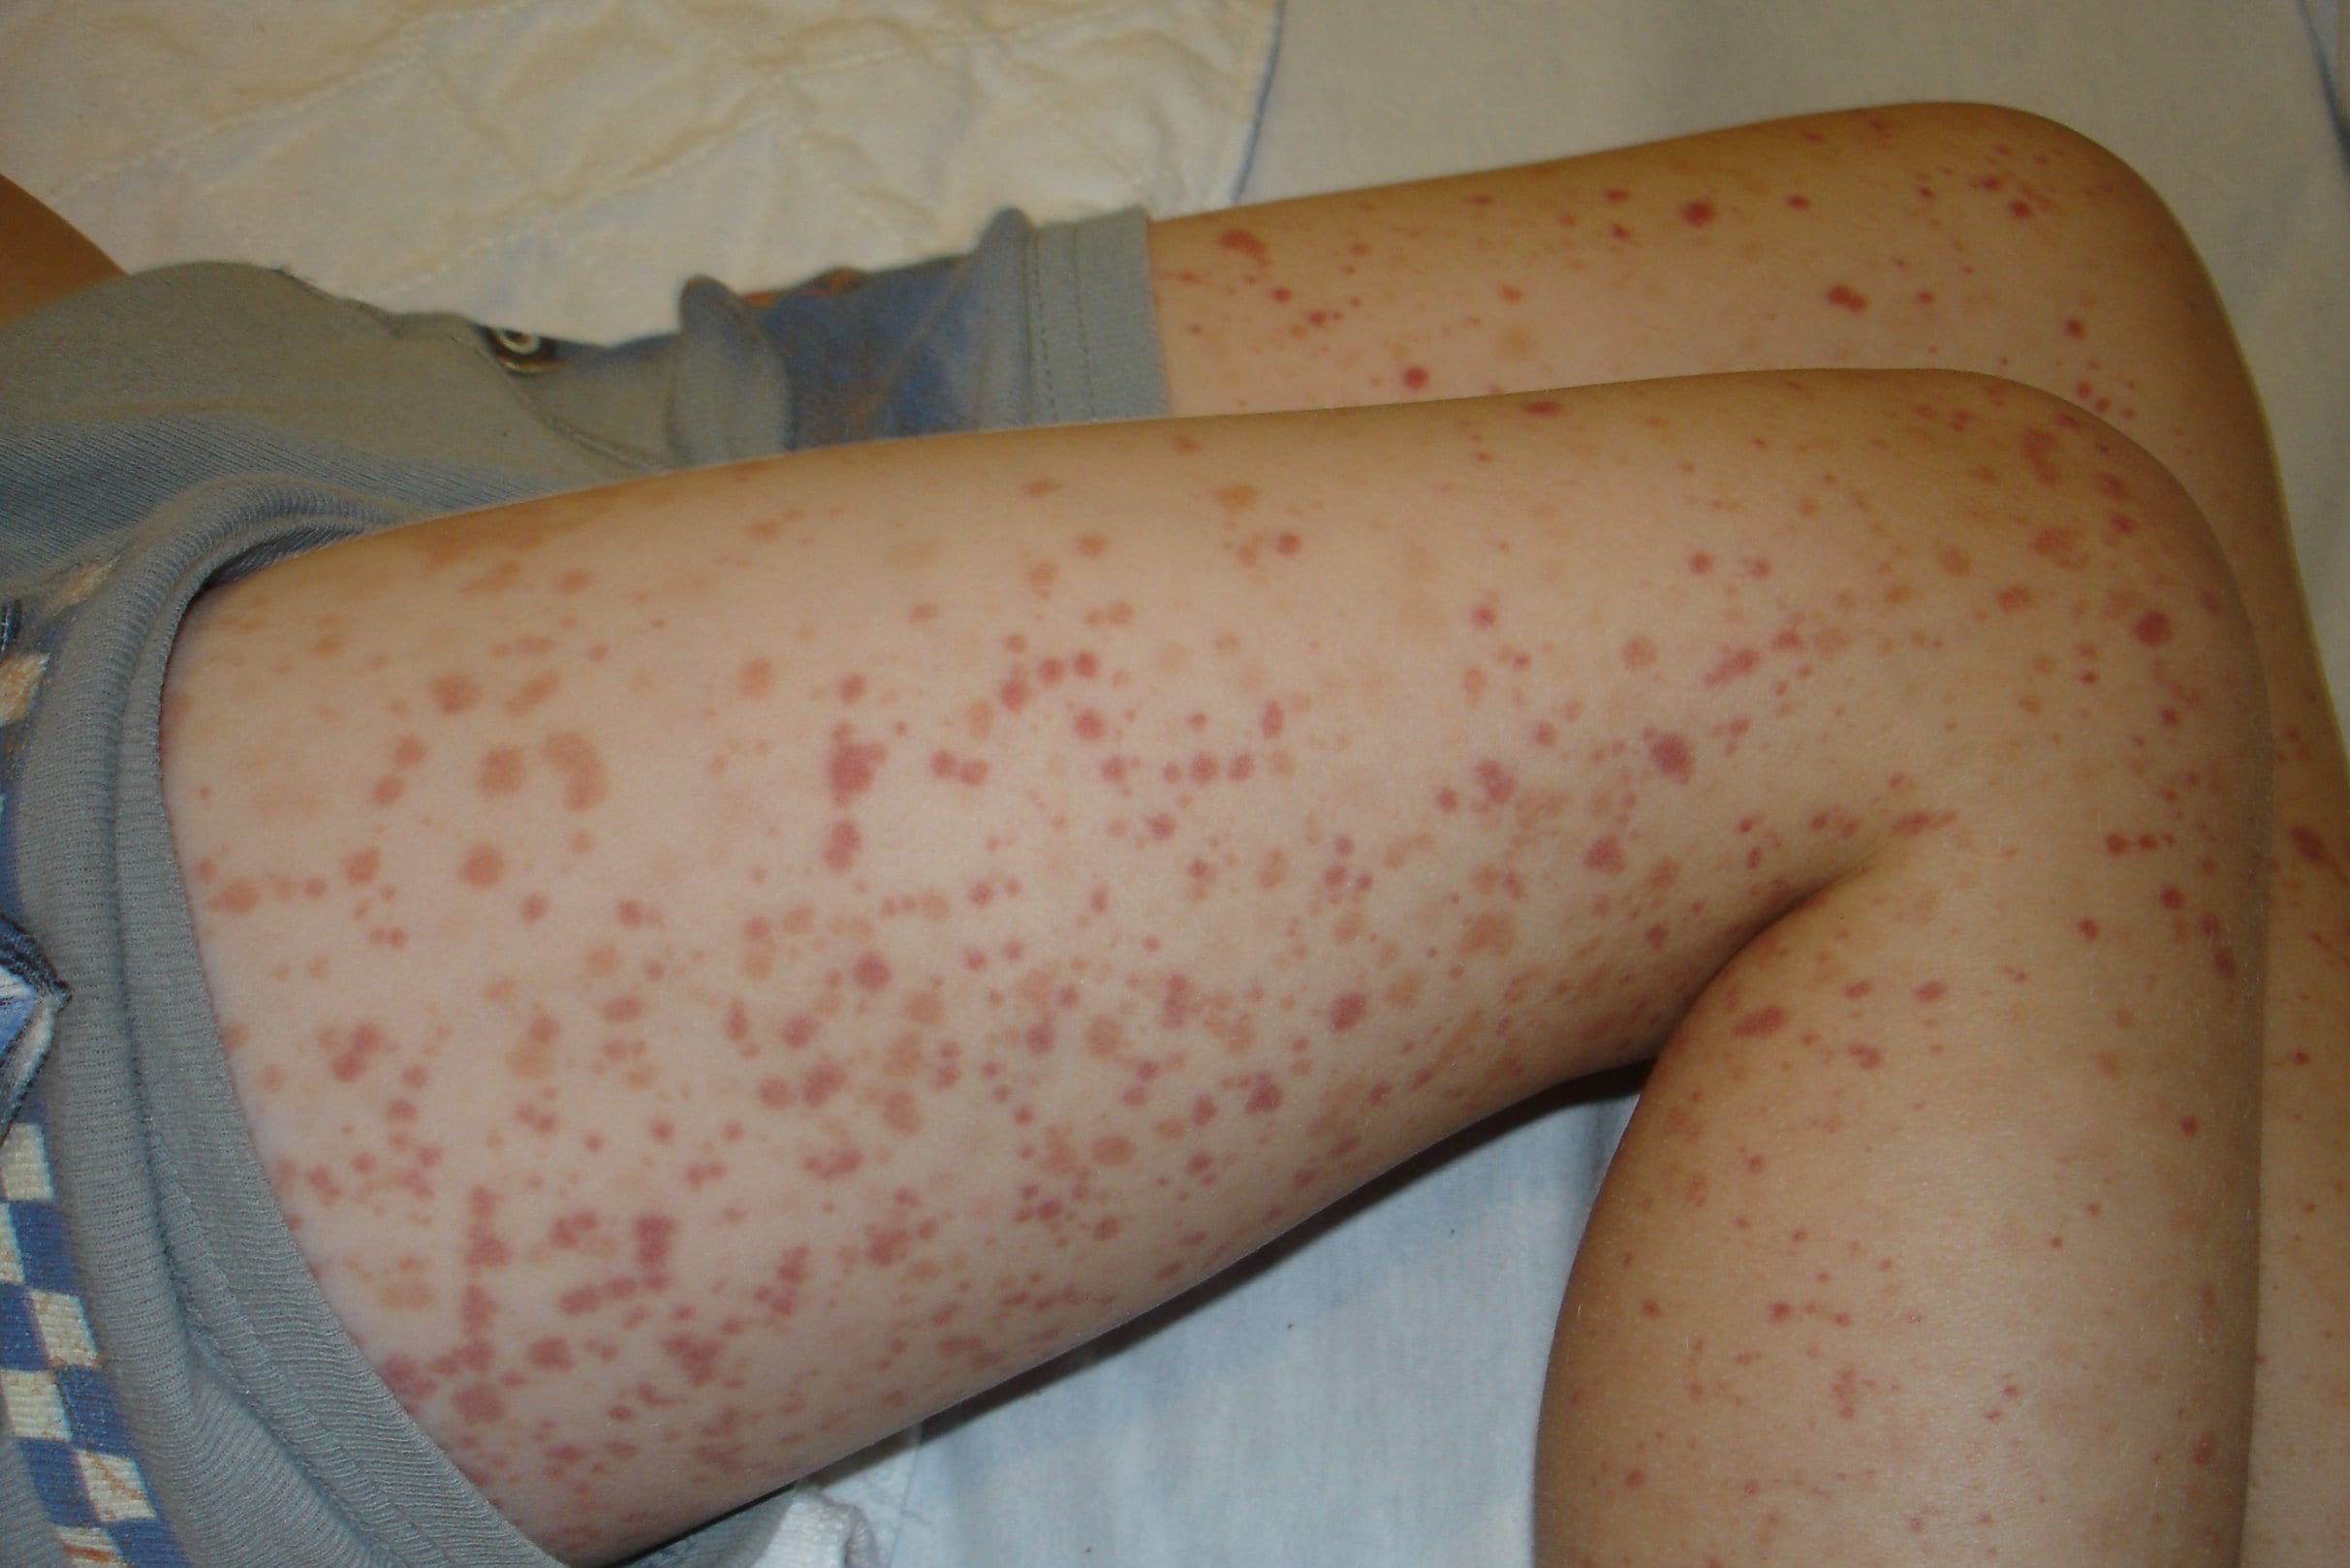 What does it mean if you have a purpura rash?